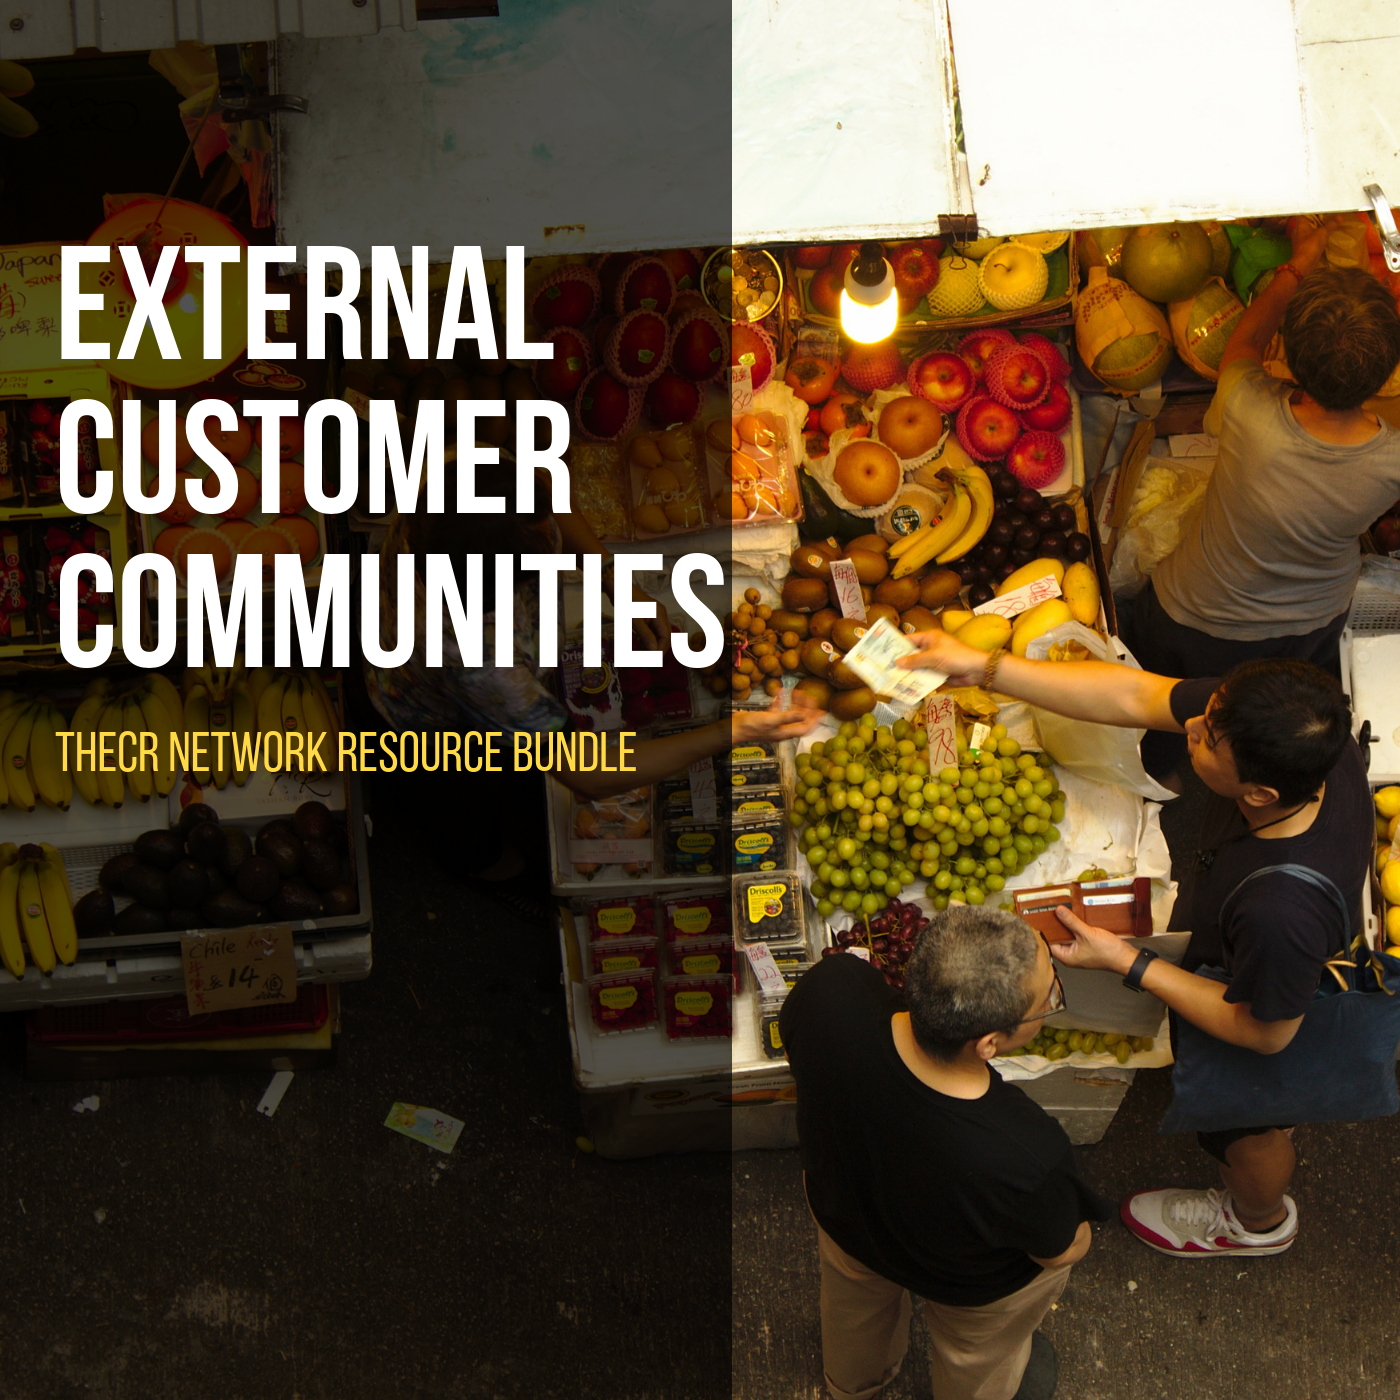 Digital Customer Communities. Resources for Community Managers.